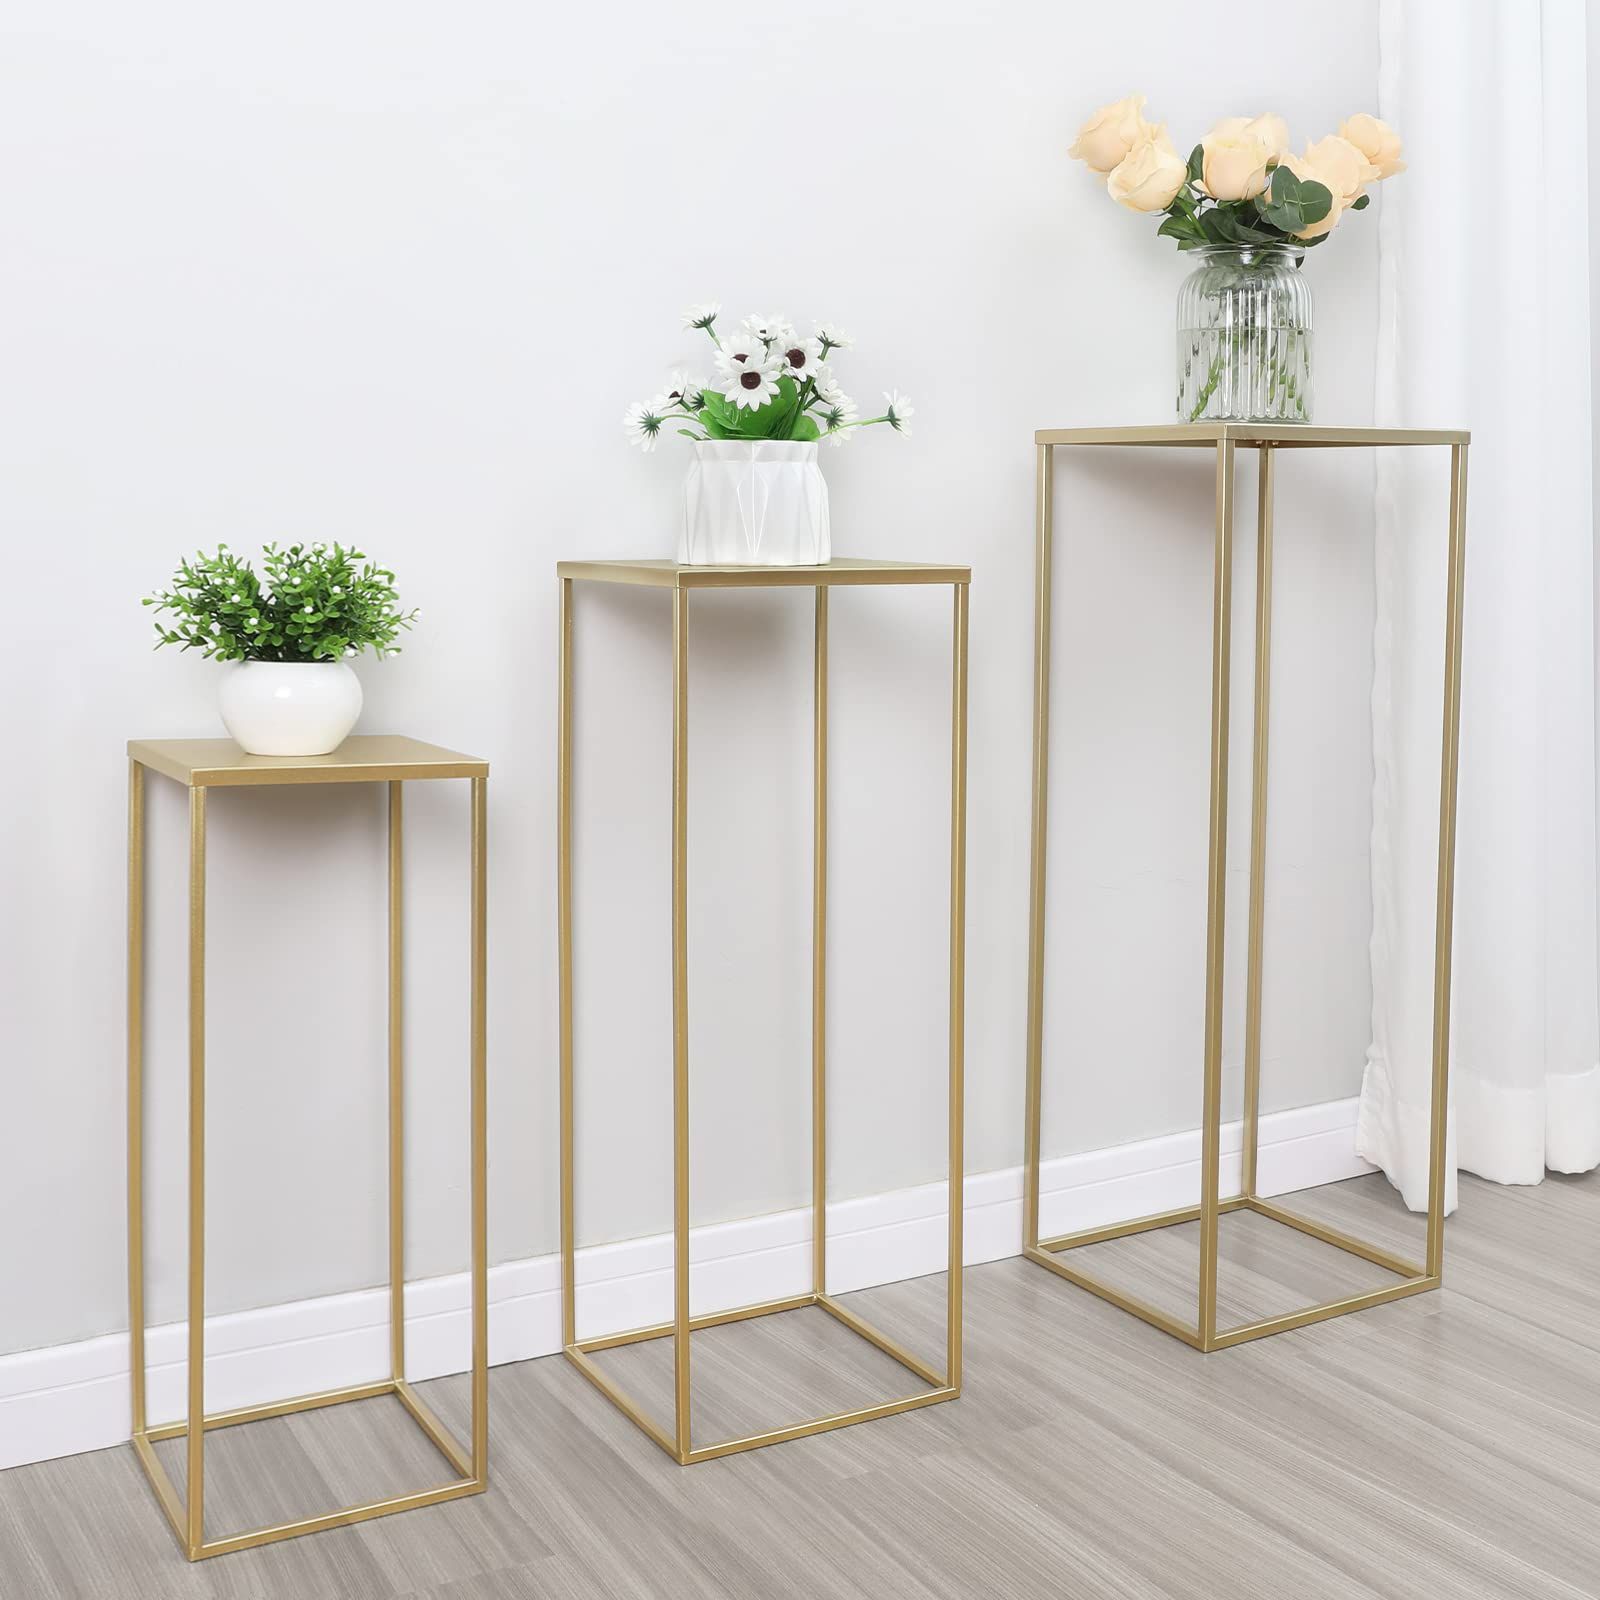 Gold Plant Stands Intended For Most Up To Date Amazon : Set Of 3 Metal Plant Stand Golden Nesting Display End Table  Tall Pedestal Cylinder Rack, Indoor Outdoor Flower Holder Corner Planter  Pot Rack For Parties Home Decor, Patio Weddings Ceremony : (View 1 of 10)